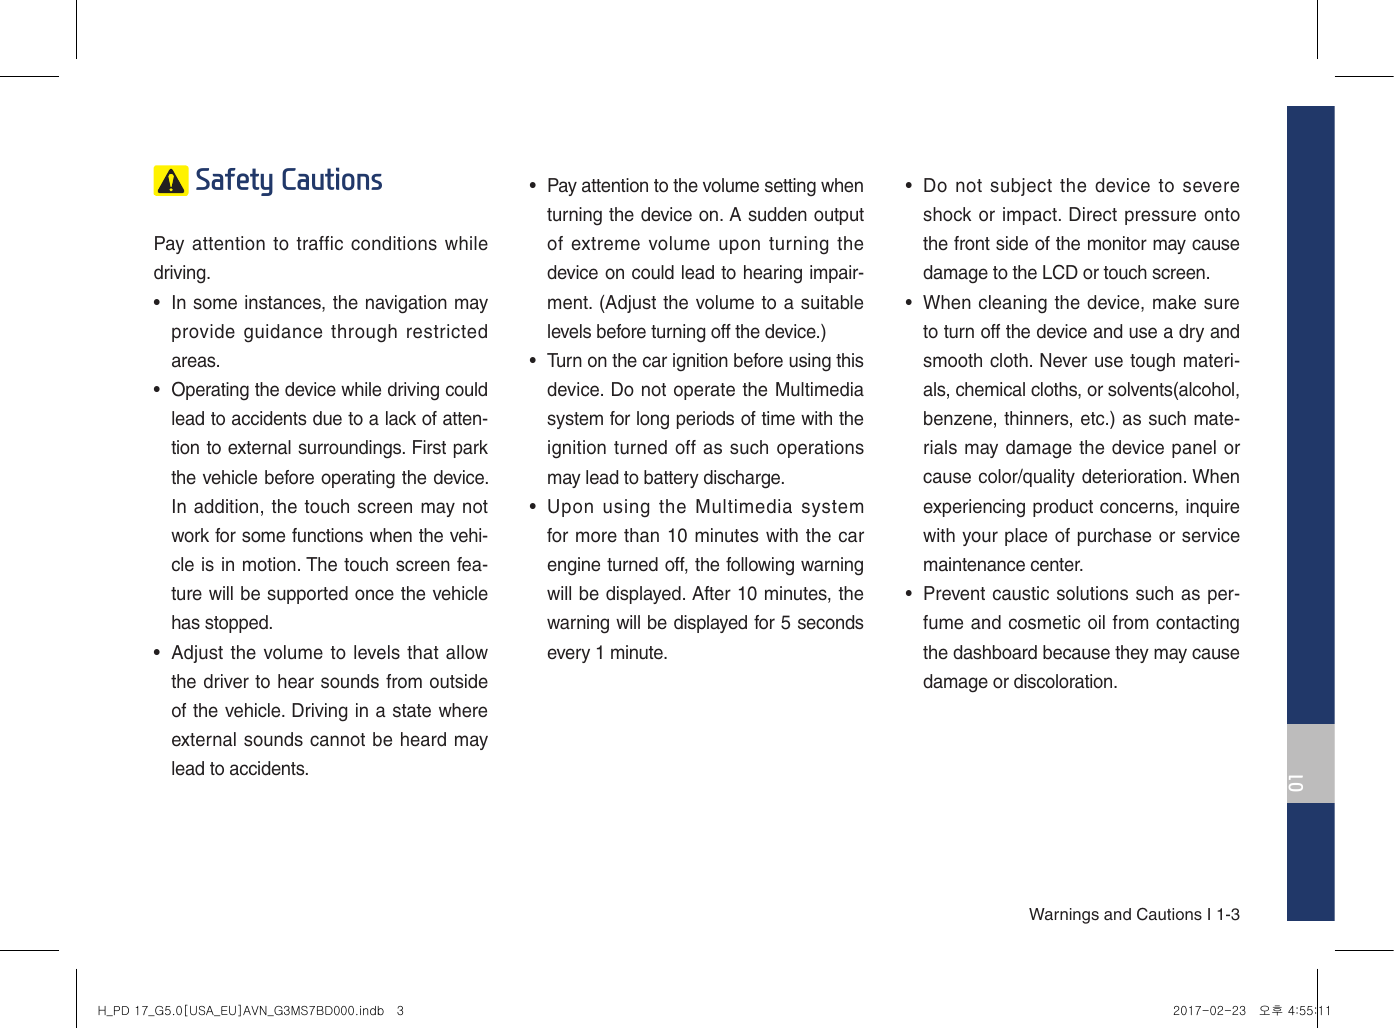 01Warnings and Cautions I 1-3 Safety Cautions Pay attention to traffic conditions while driving. •In some instances, the navigation mayprovide guidance  through restrictedareas. • Operating the device while driving couldlead to accidents due to a lack of atten-tion to external surroundings. First parkthe vehicle before operating the device. In addition, the touch screen may notwork for some functions when the vehi-cle is in motion. The touch screen fea-ture will be supported once the vehiclehas stopped.•Adjust the volume to levels that allowthe driver to hear sounds from outsideof the vehicle. Driving in a state whereexternal sounds cannot be heard maylead to accidents.•Pay attention to the volume setting when turning the device on. A sudden outputof extreme volume upon  turning thedevice on could lead to hearing impair-ment. (Adjust the volume to a suitablelevels before turning off the device.)• Turn on the car ignition before using thisdevice. Do not operate the Multimediasystem for long periods of time with theignition turned off as such operationsmay lead to battery discharge.•Upon  using  the  Multimedia  systemfor more than 10 minutes with the carengine turned off, the following warningwill be displayed. After 10 minutes, thewarning will be displayed for 5 secondsevery 1 minute.•Do not subject  the device  to severeshock or impact. Direct pressure ontothe front side of the monitor may causedamage to the LCD or touch screen.•When cleaning the device, make sureto turn off the device and use a dry andsmooth cloth. Never use tough materi-als, chemical cloths, or solvents(alcohol,benzene, thinners, etc.) as such mate-rials may damage the device panel orcause color/quality deterioration. Whenexperiencing product concerns, inquirewith your place of purchase or servicemaintenance center.•Prevent caustic solutions such as per-fume and cosmetic oil from contactingthe dashboard because they may causedamage or discoloration.H_PD 17_G5.0[USA_EU]AVN_G3MS7BD000.indb   3 2017-02-23   오후 4:55:11